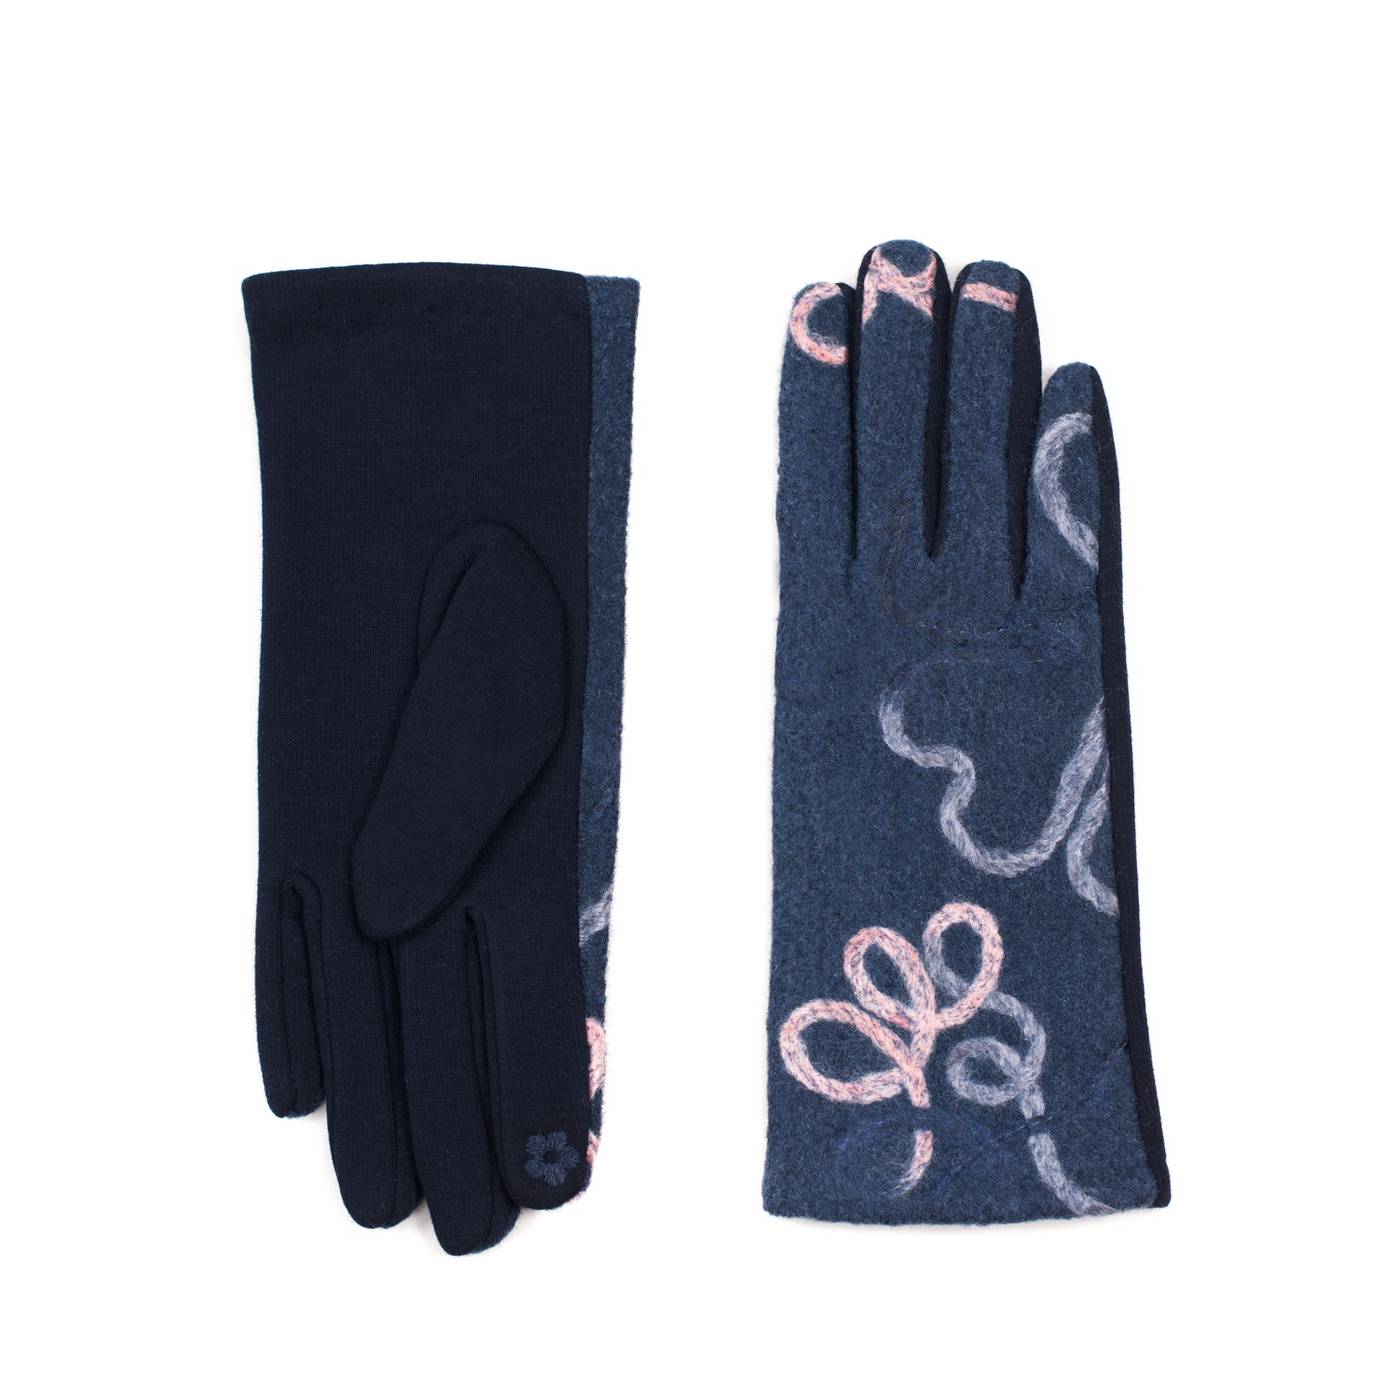 Art Of Polo Woman's Gloves rk18411 Navy Blue